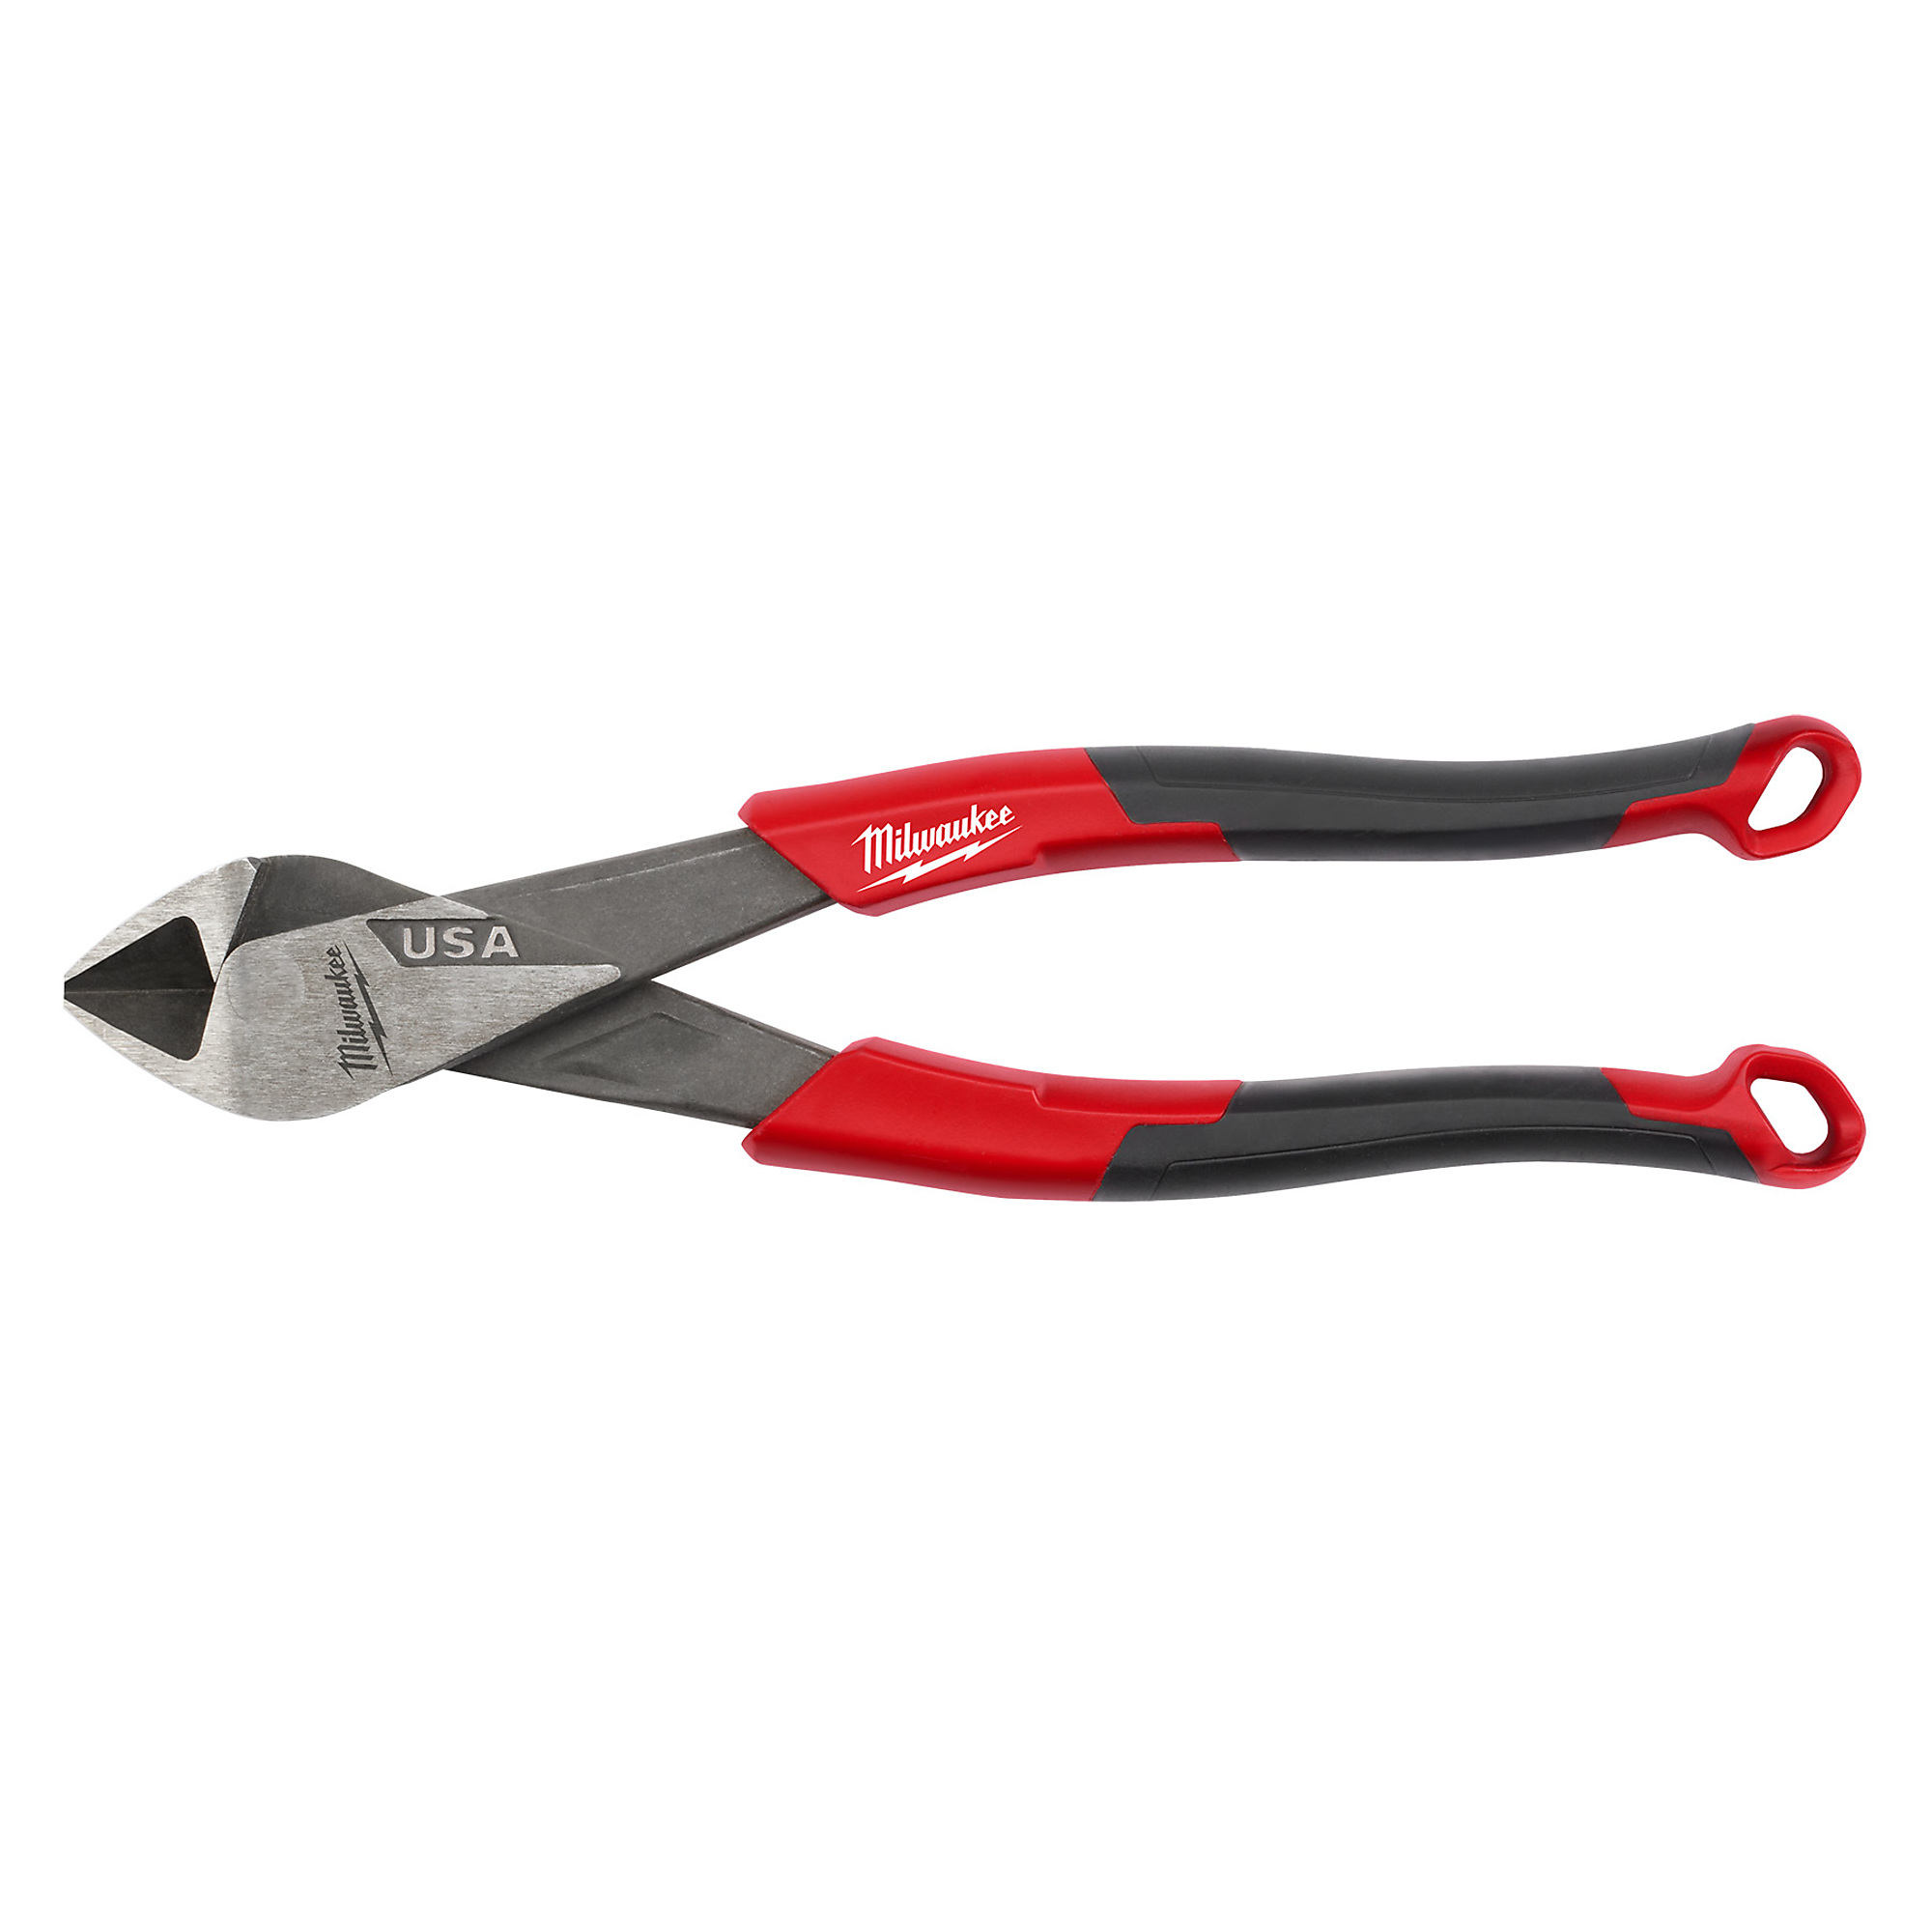 Milwaukee, 8Inch Diagonal Comfort Grip Pliers USA, Pieces (qty.) 1, Material Steel, Model MT558